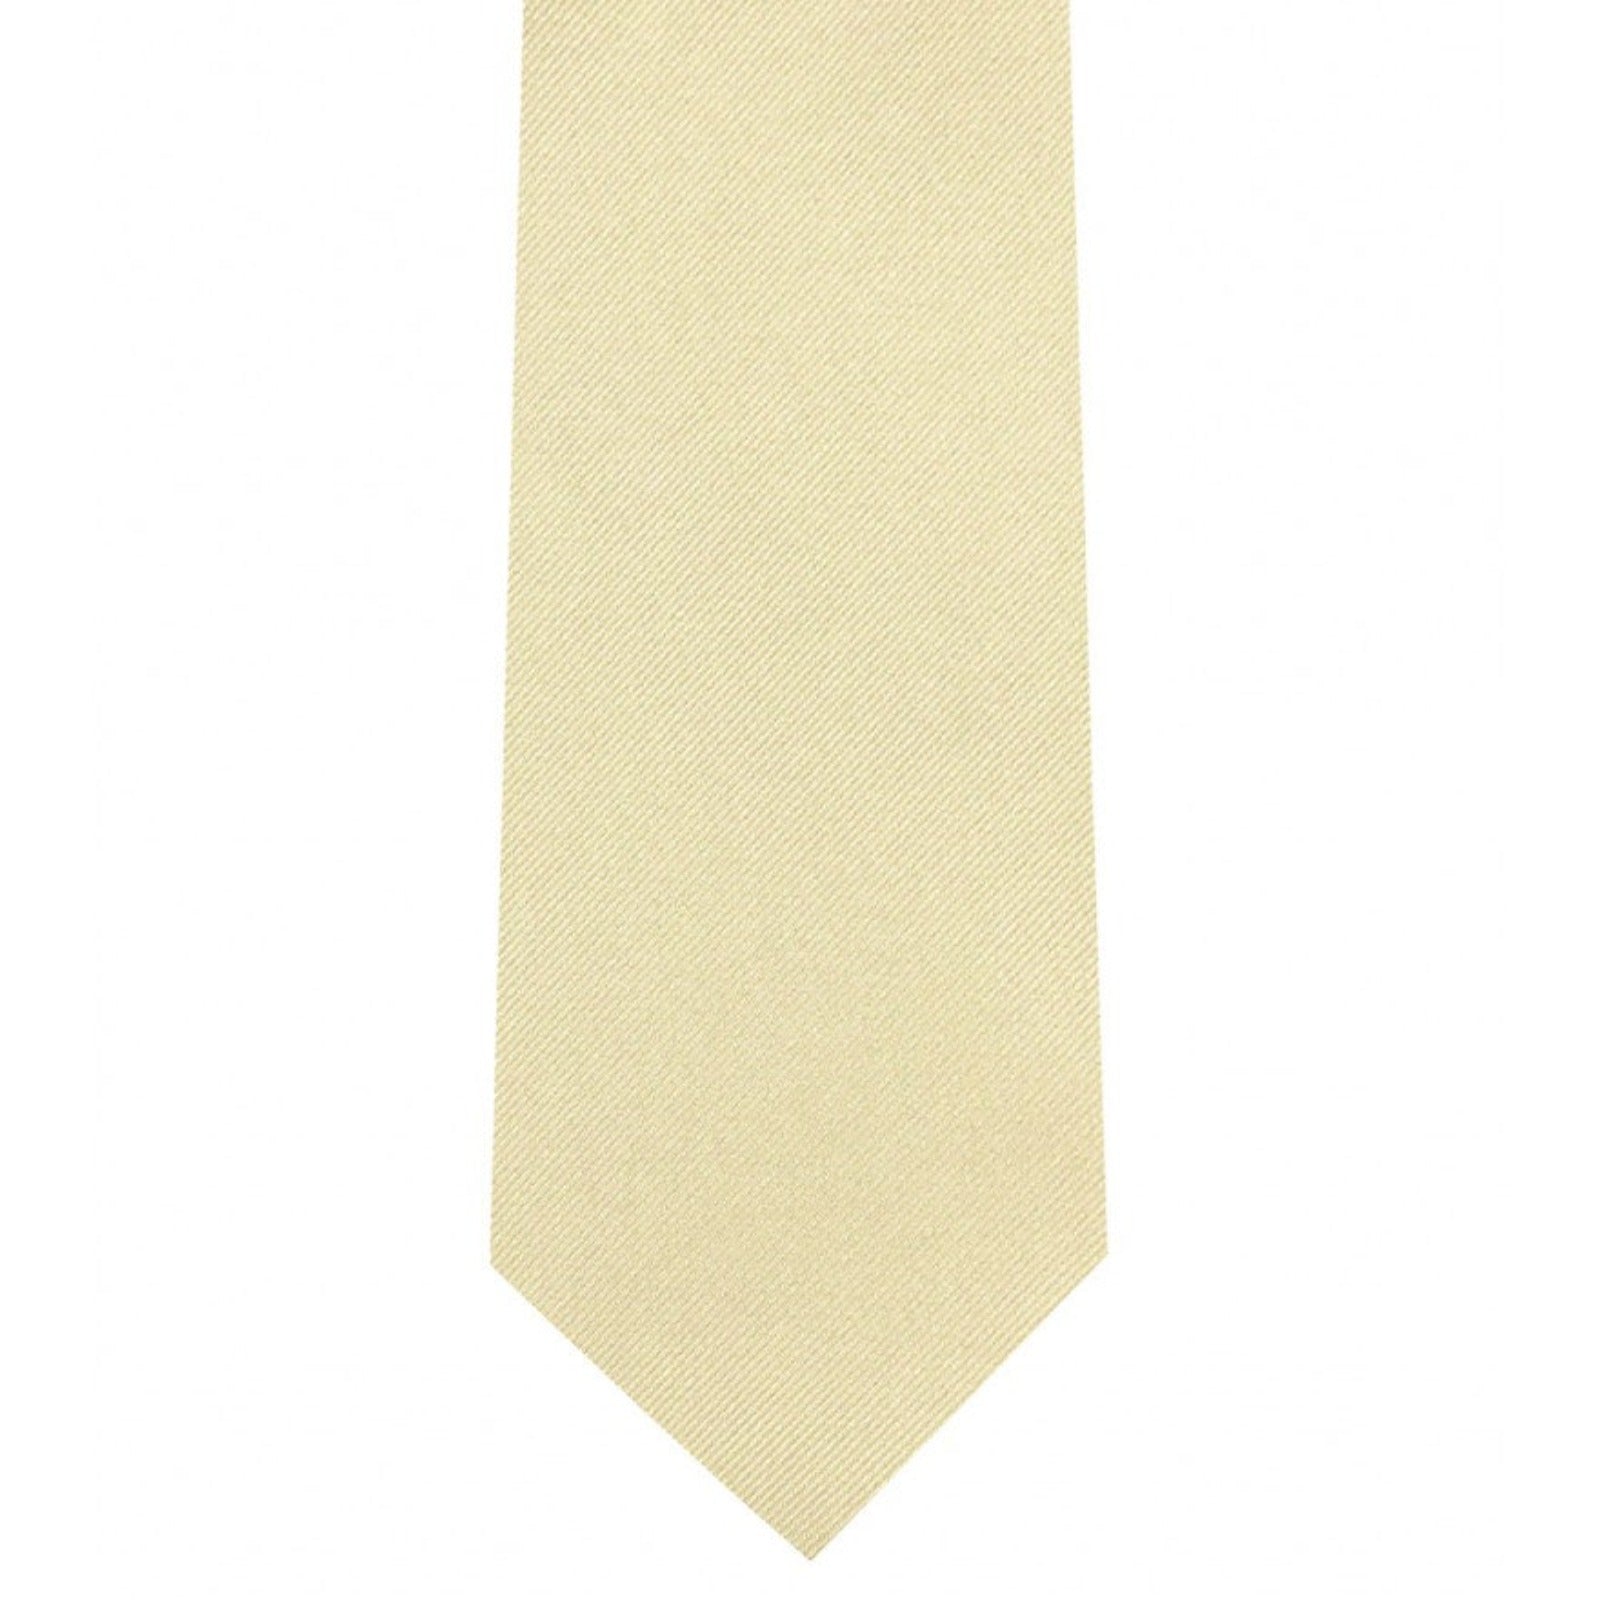 Classic Champagne Tie Ultra Skinny tie width 2.25 inches With Matching Pocket Square | KCT Menswear